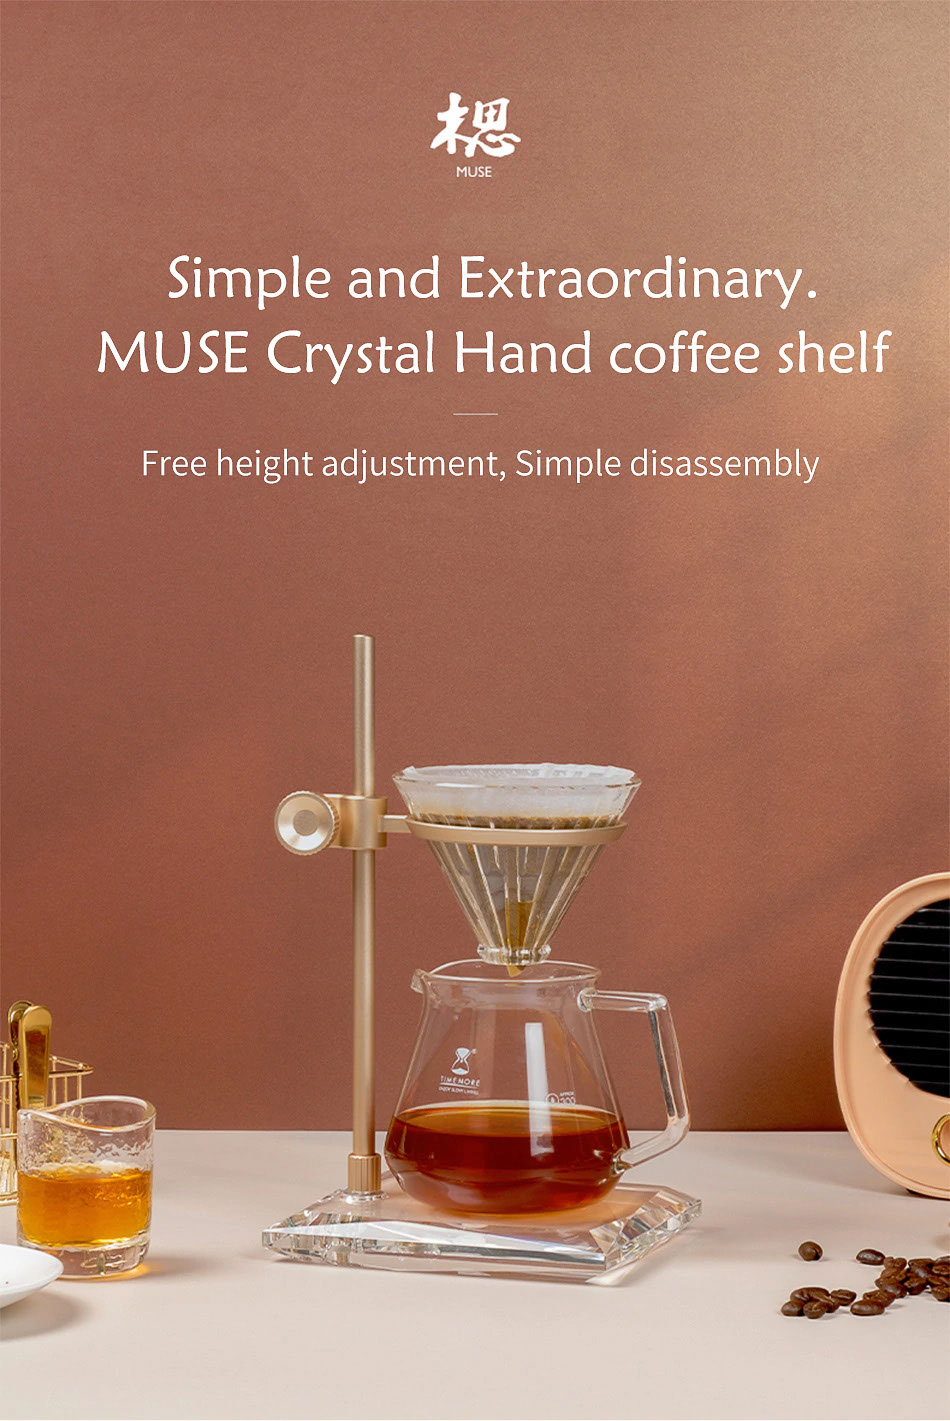 timemore muse crystal pour over stand แท่นดริปกาแฟ 04